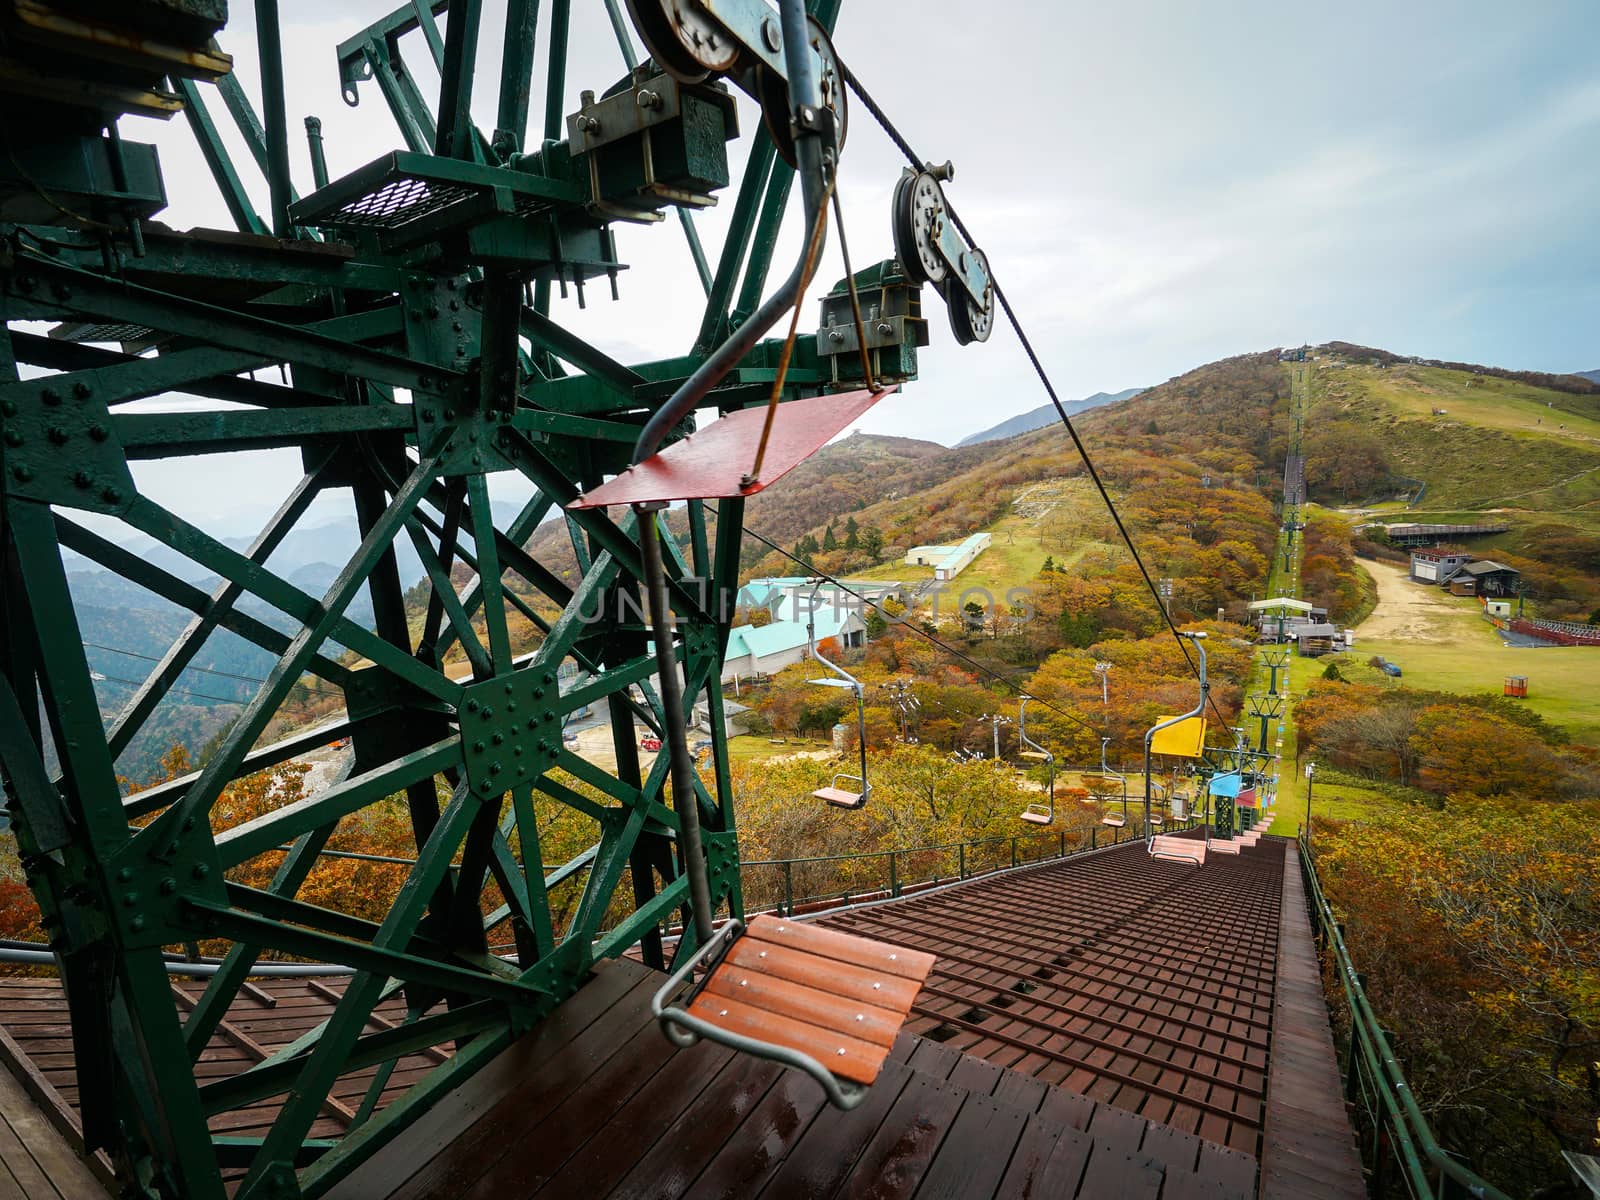 The Gozaisho Ropeway Lifts. (a lift that pass through lot of trees towards the summit of Mt. Gozaisho)